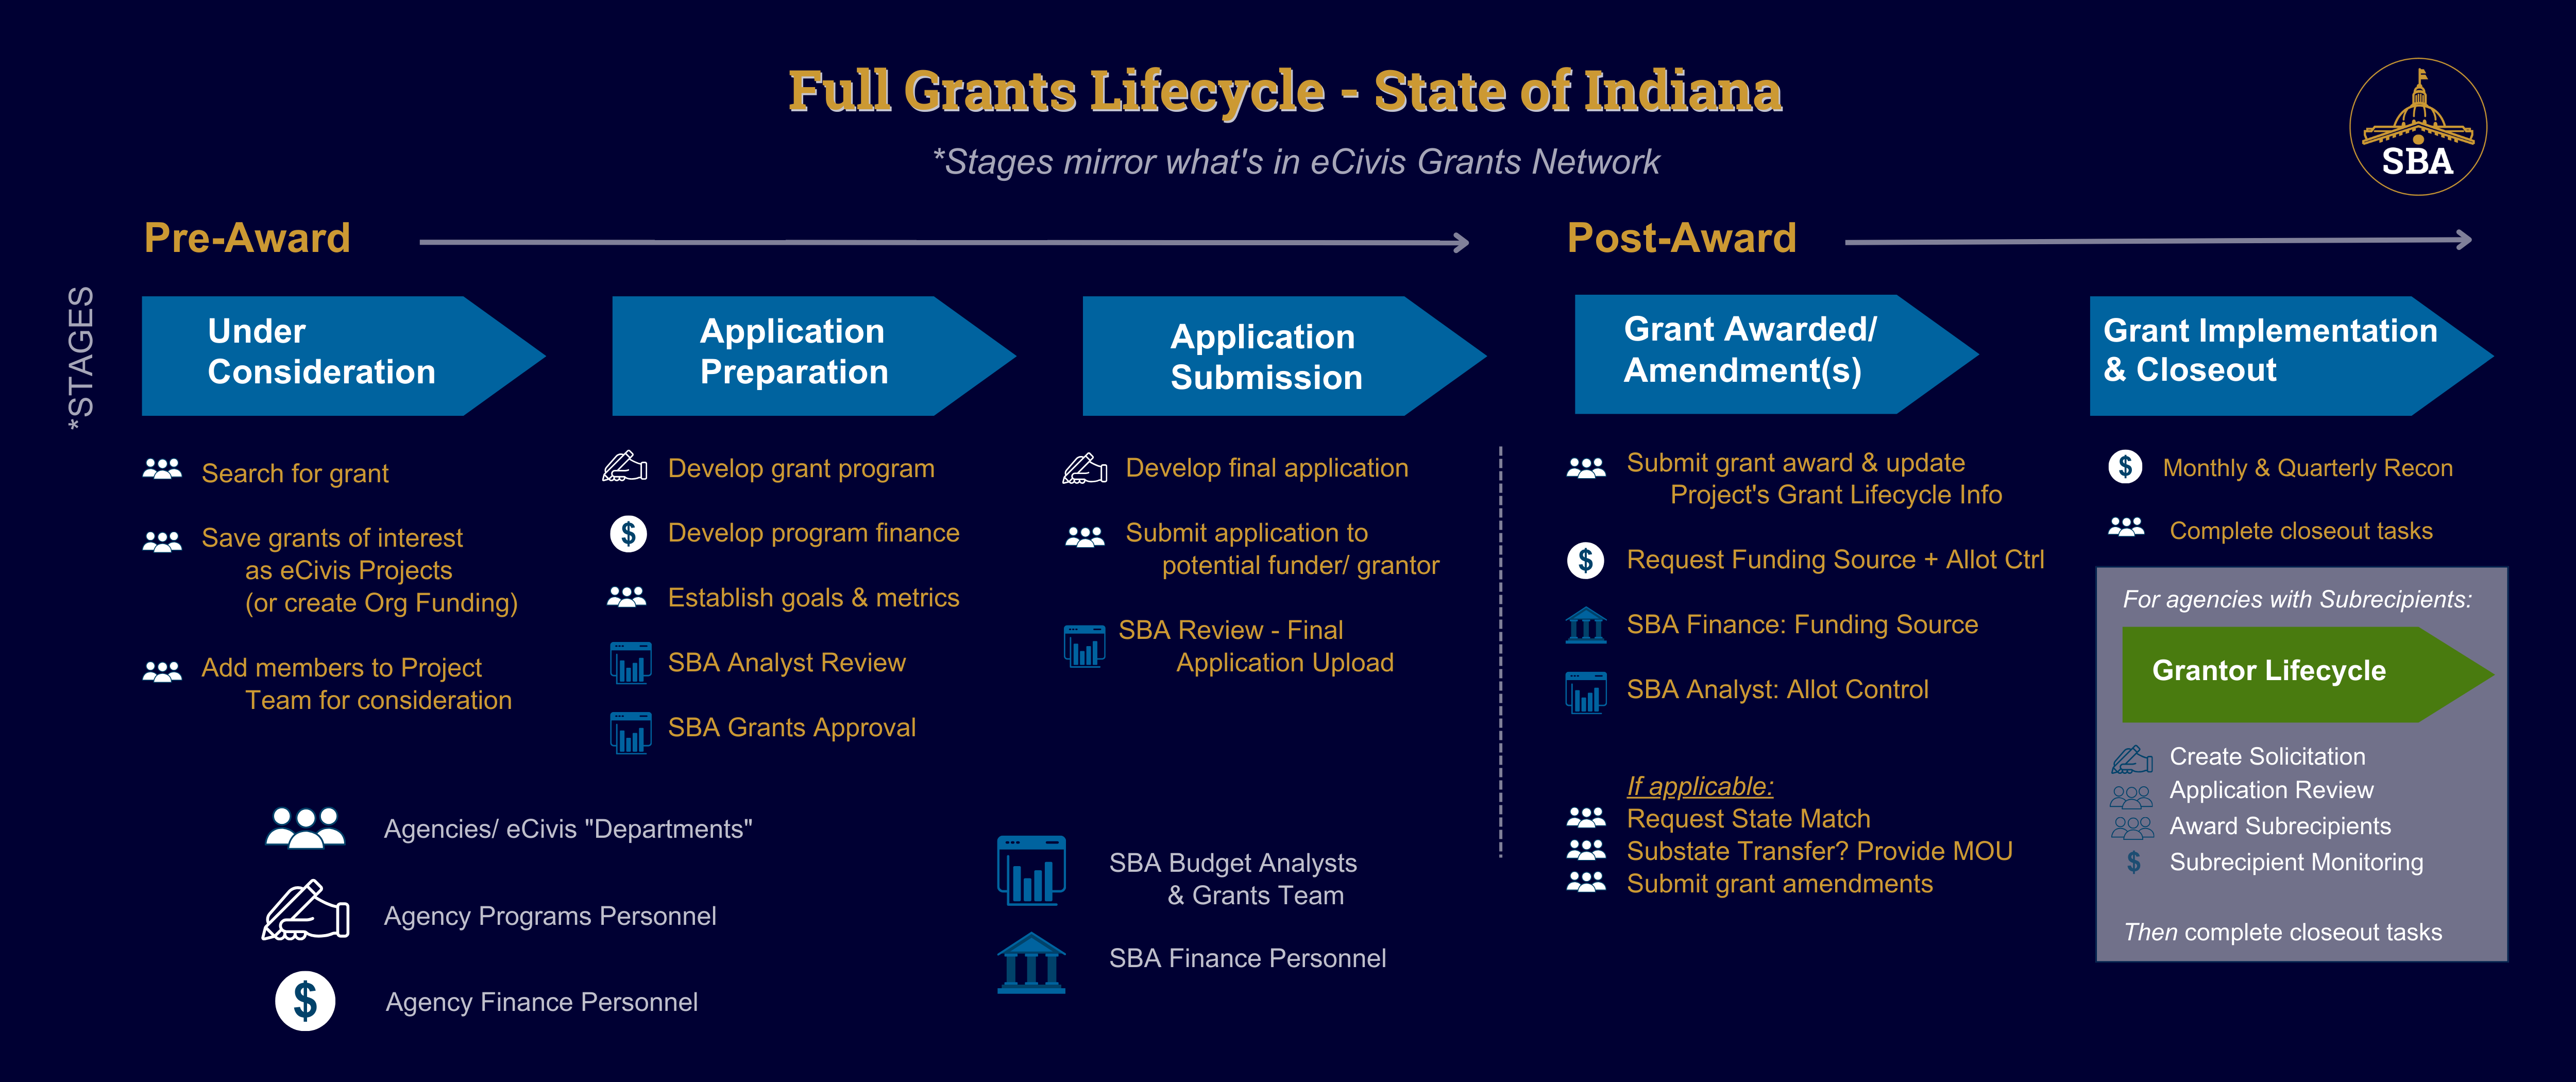 This graphic provides a visual overview of the grants lifecycle at the State of Indiana. It focuses on stages that mimic those of the eCivis Grants Network, which involve specific processes and roles for Indiana state agencies.   Before an agency is awarded a grant it is considered to be in Grantee Pre-Award, which includes Under Consideration, Application Preparation, and Application Submission.  Once an agency has been notified of a grant award, it progresses into Grantee Post-Award, which includes Grant Awarded, Implementation, and Closeout eCivis stages. 